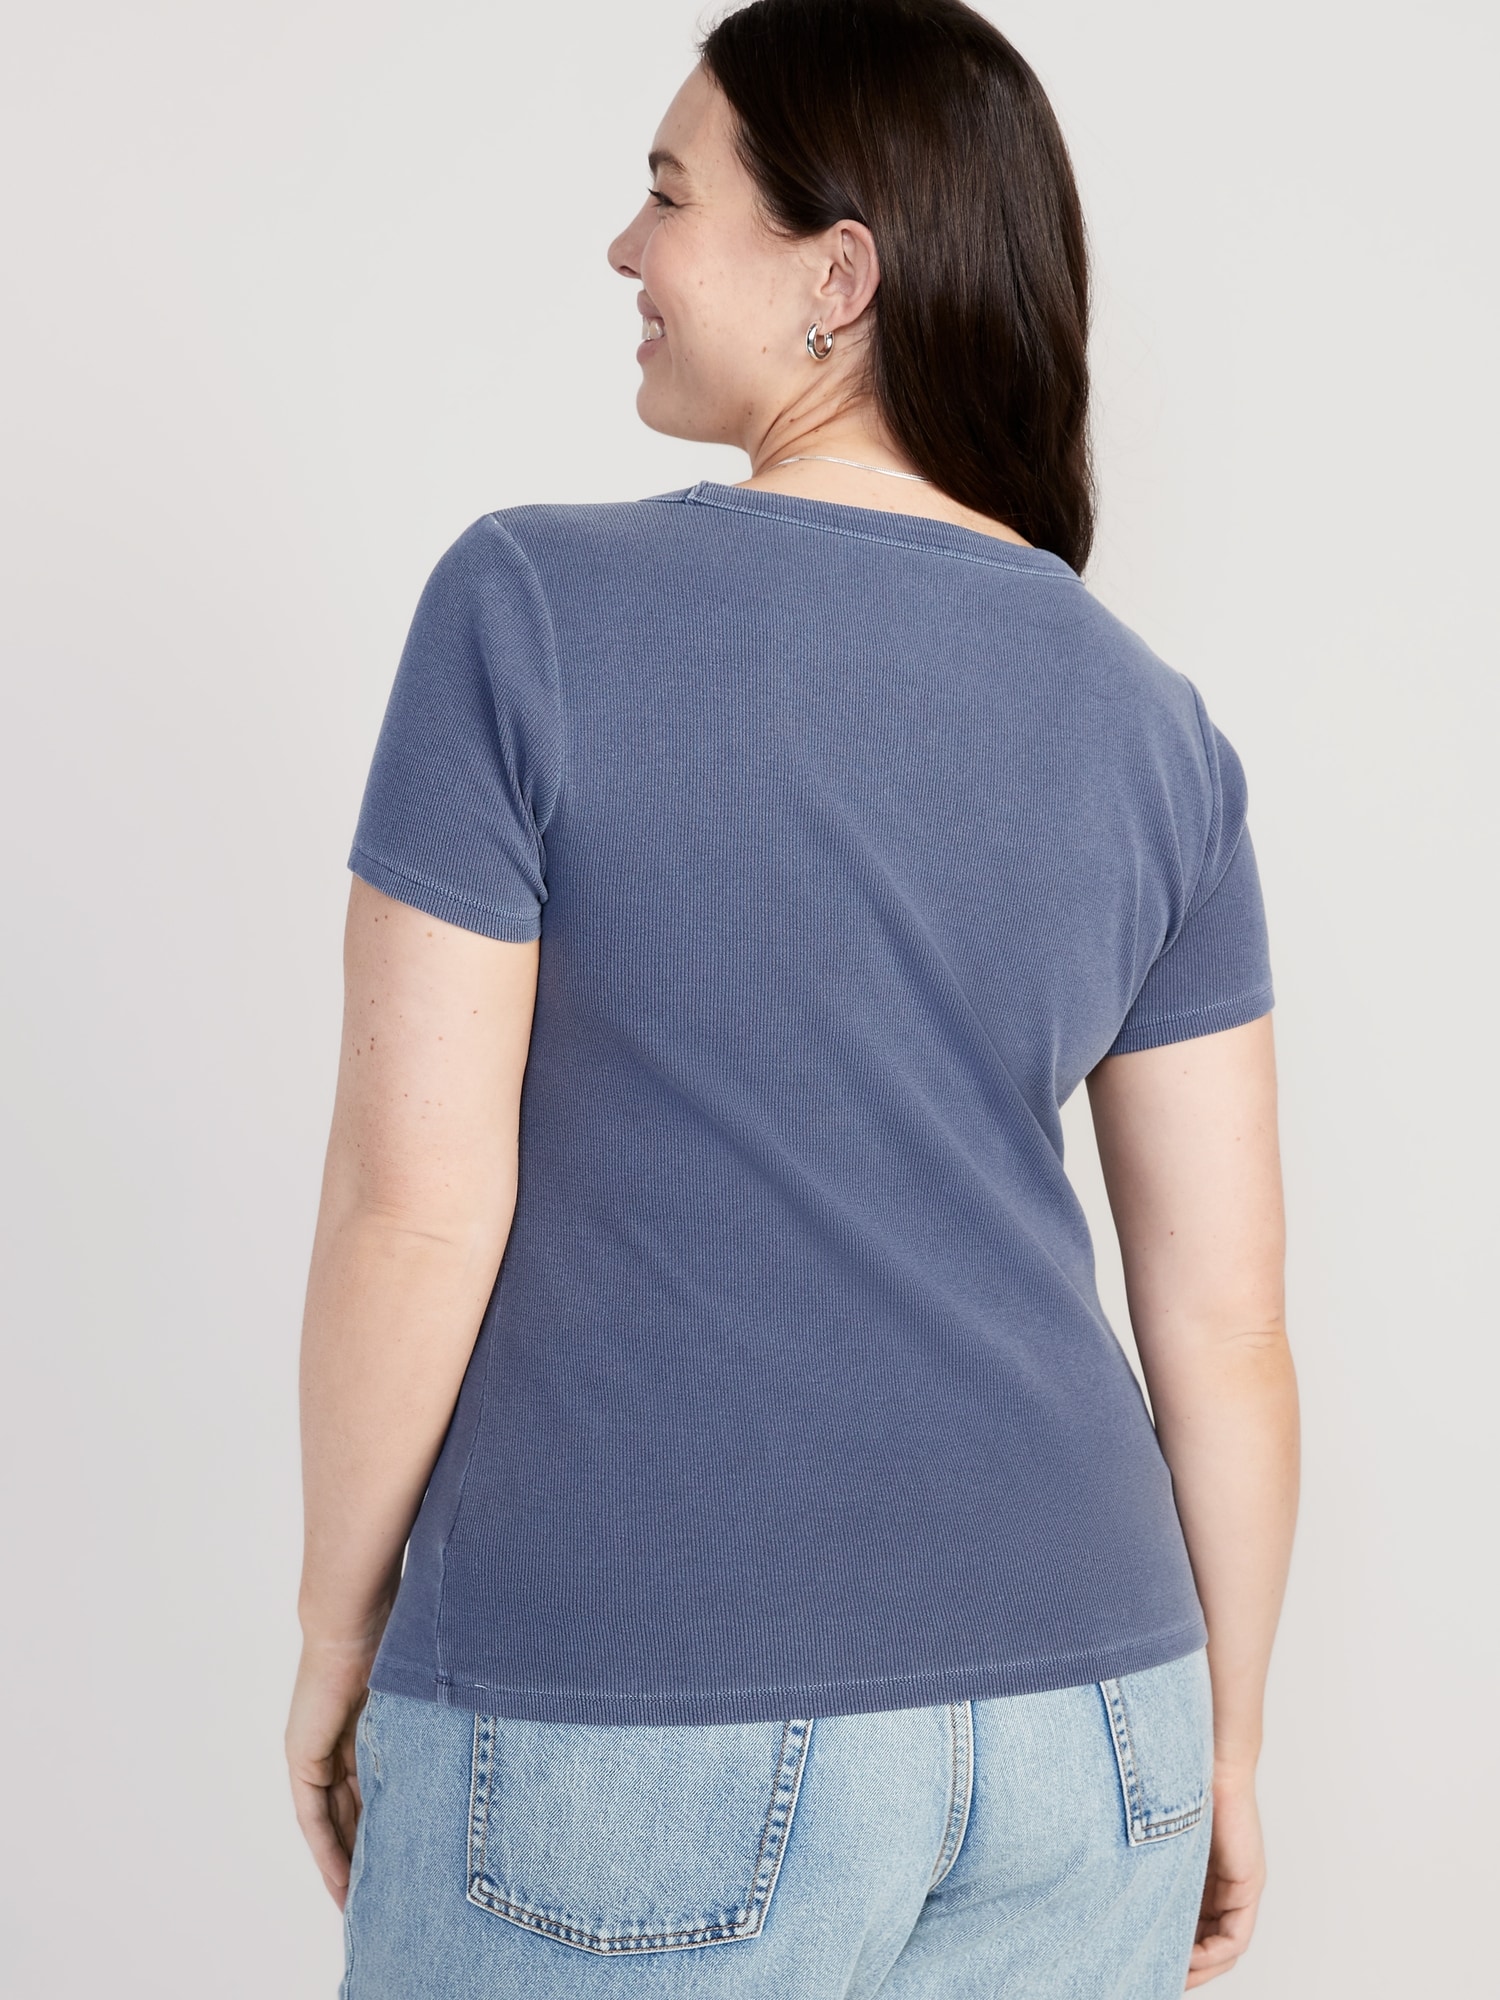 Fitted Scoop-Neck T-Shirt | Old Navy